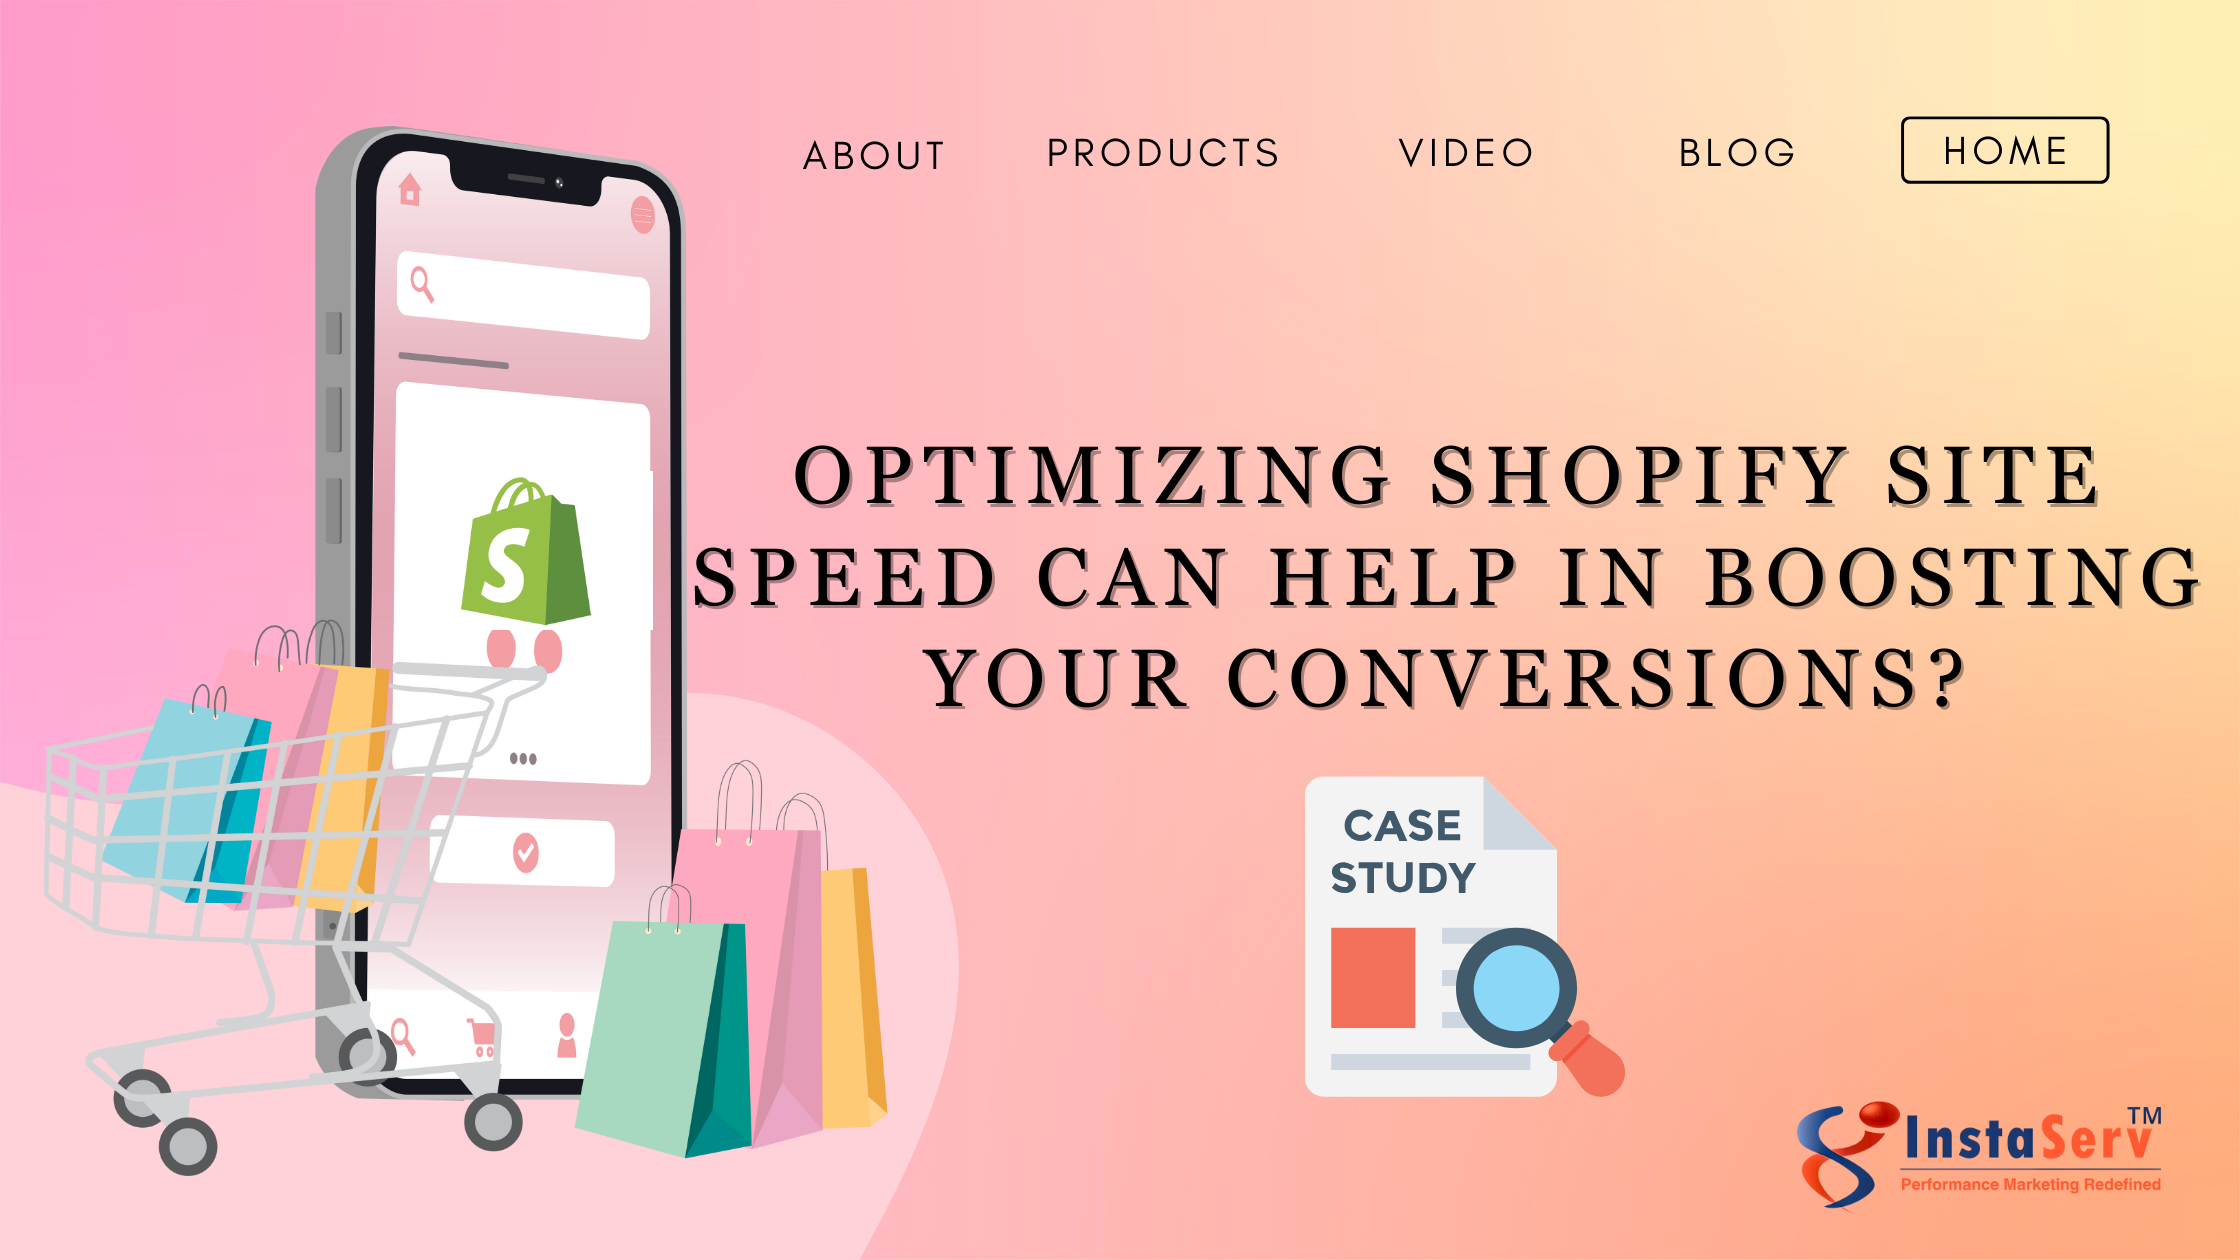 Optimizing Shopify store for conversions